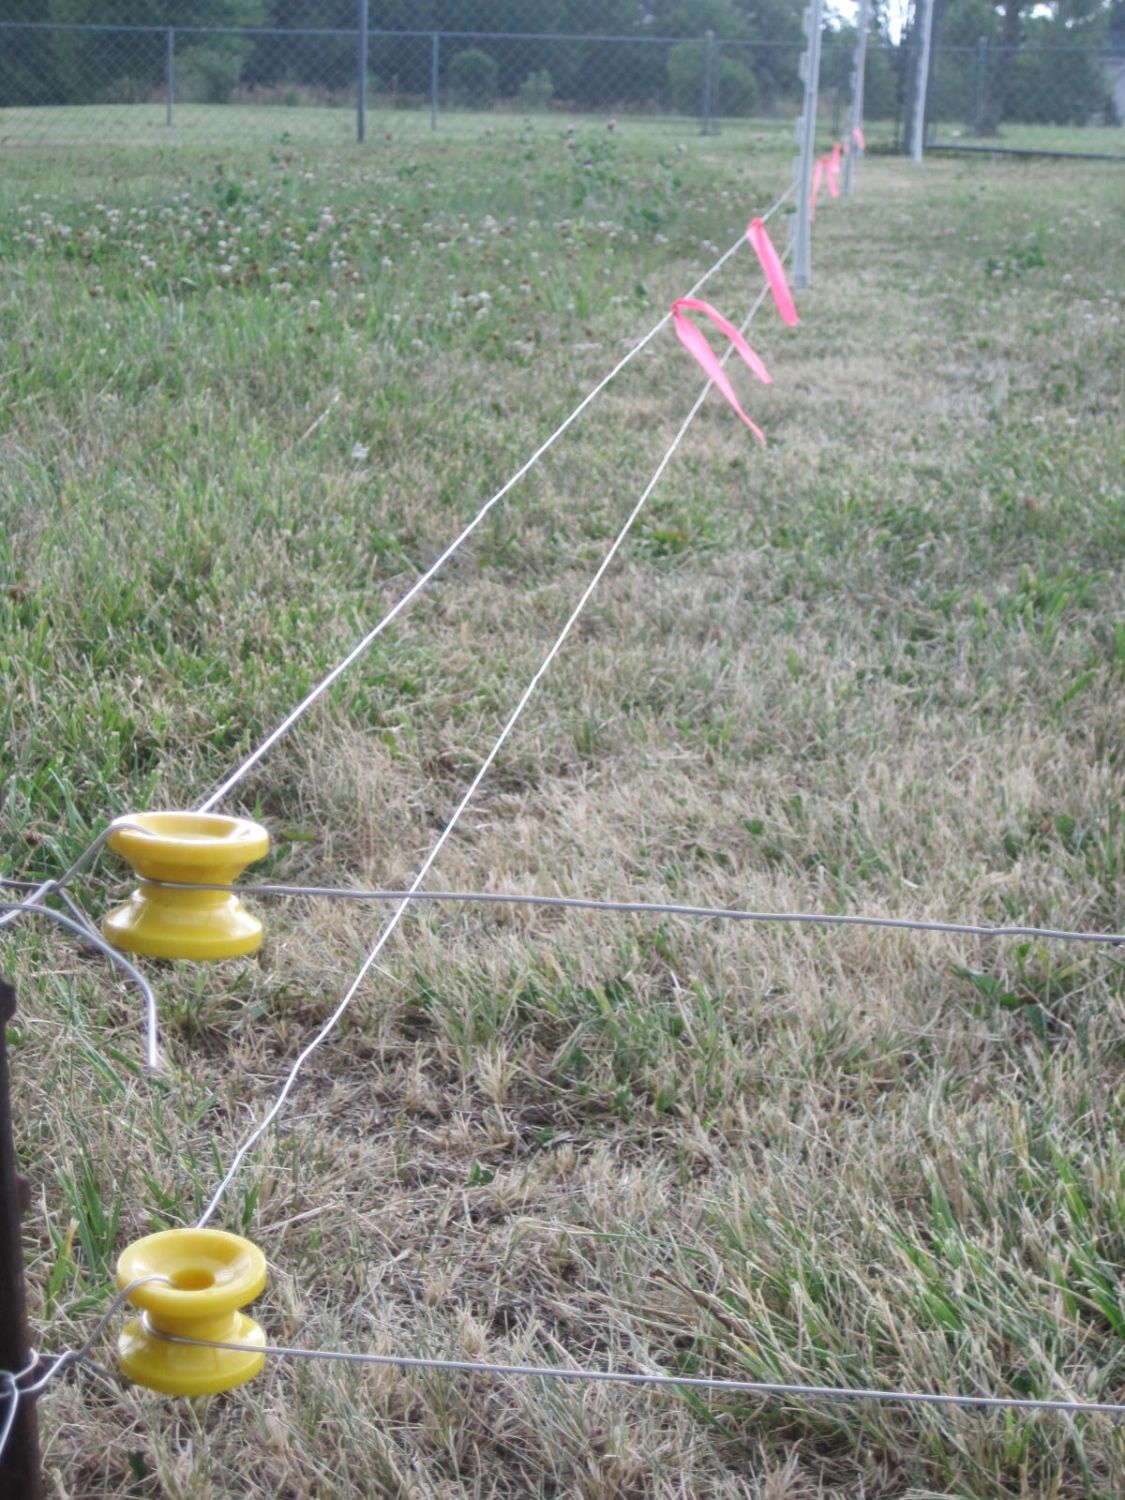 A Treatise on Electric Fences for Poultry BackYard Chickens